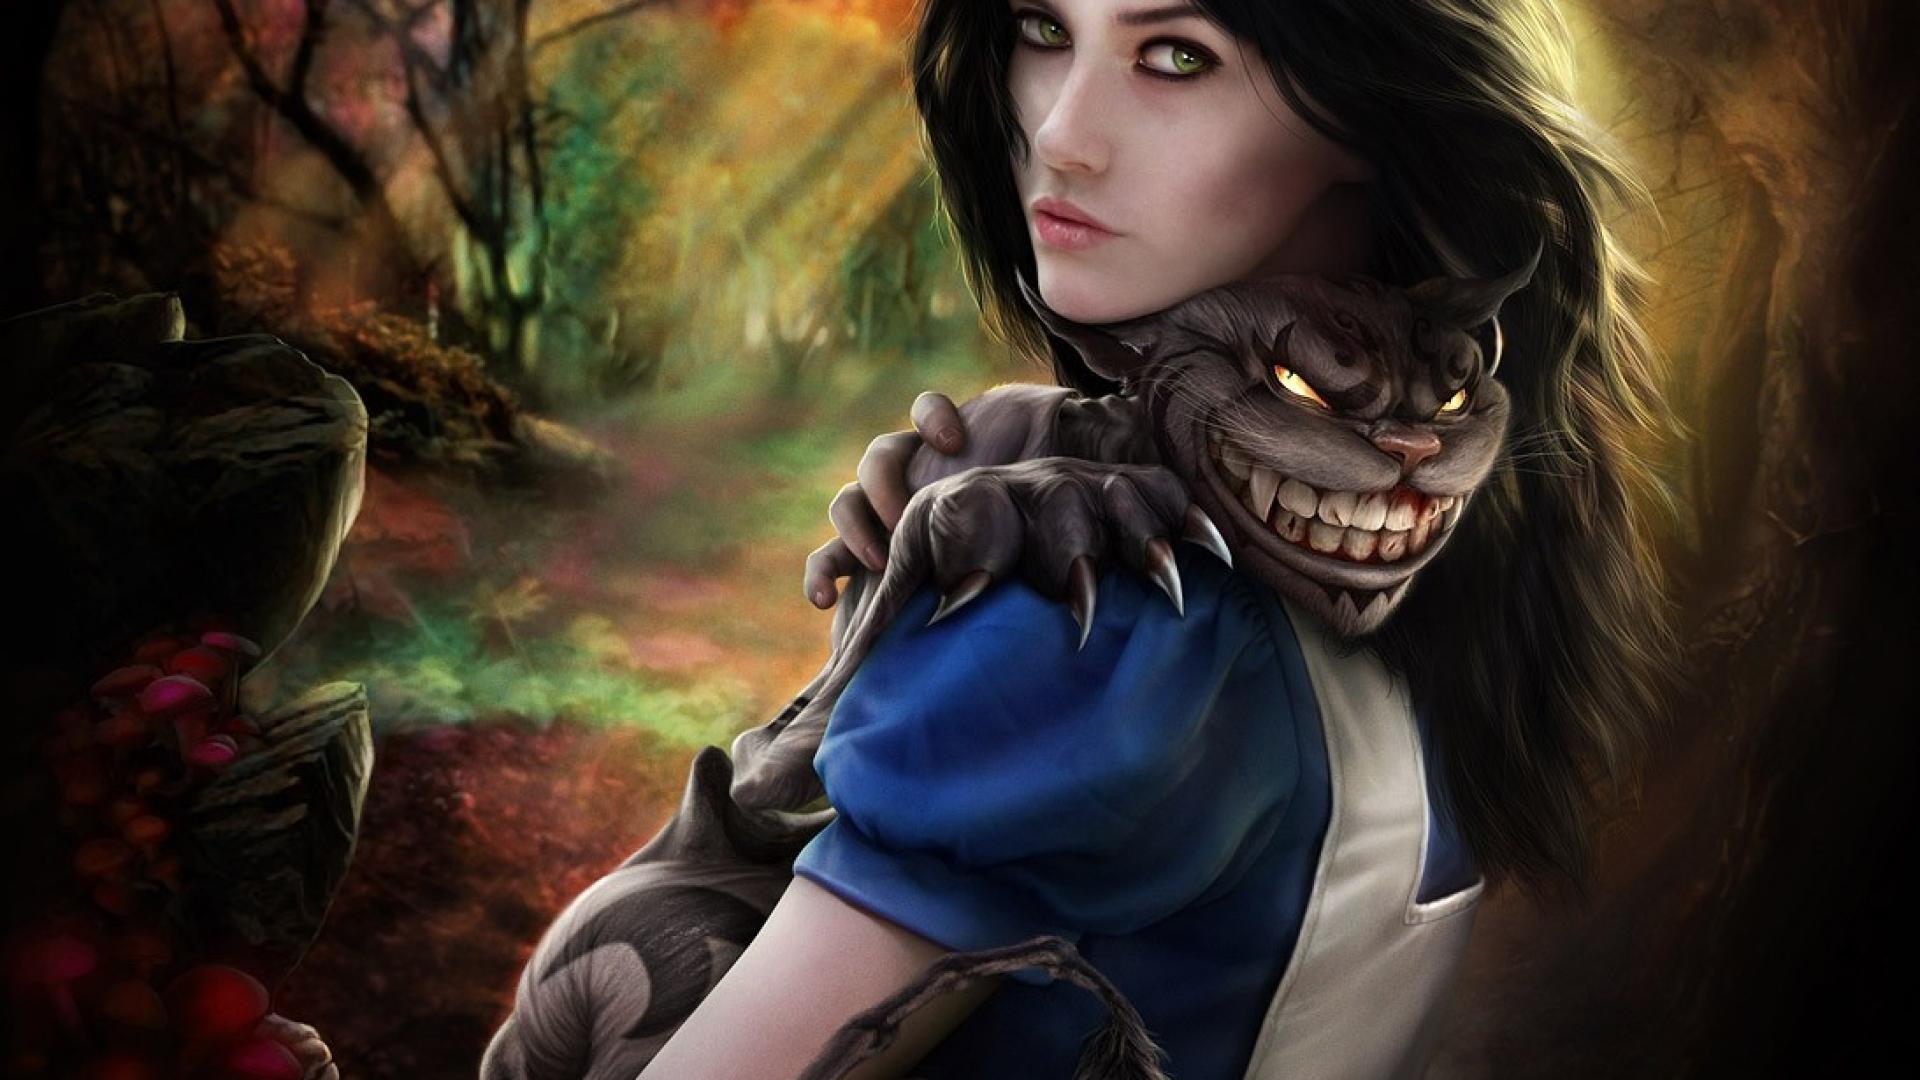 american mcgee's alice, video game